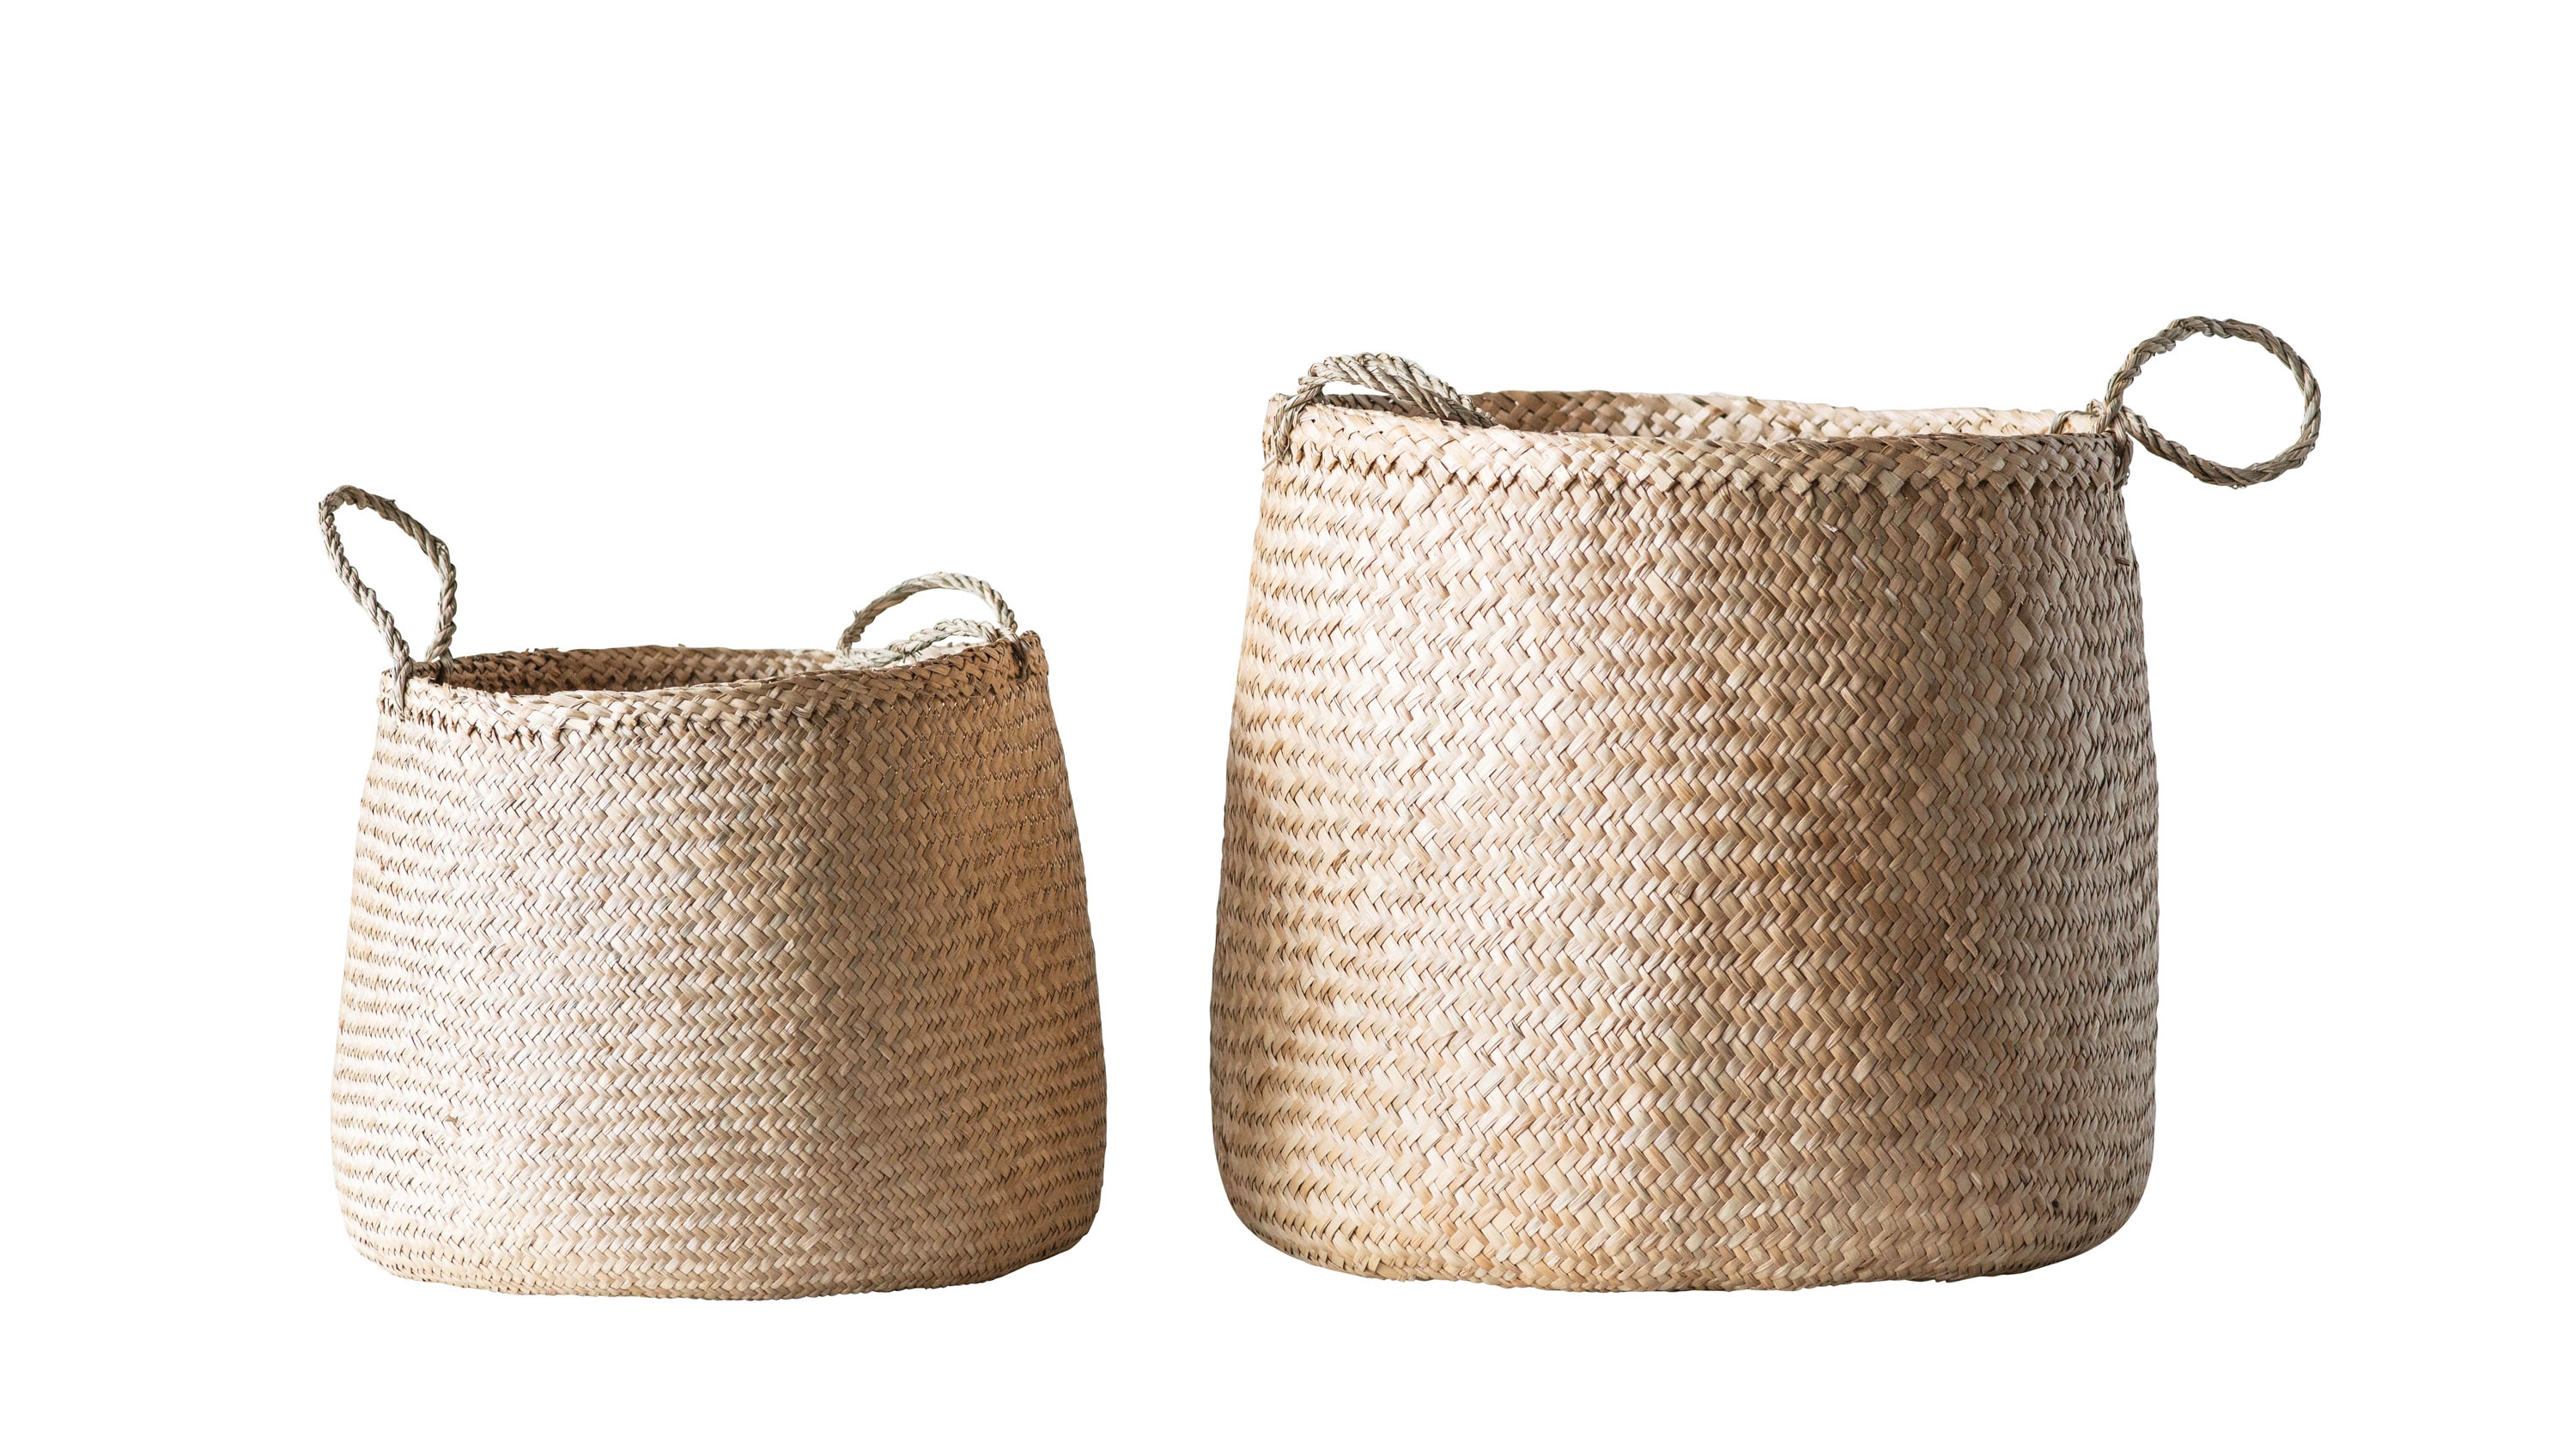 Beige Woven Seagrass Basket with Handles (Set of 2 Sizes) - Image 0